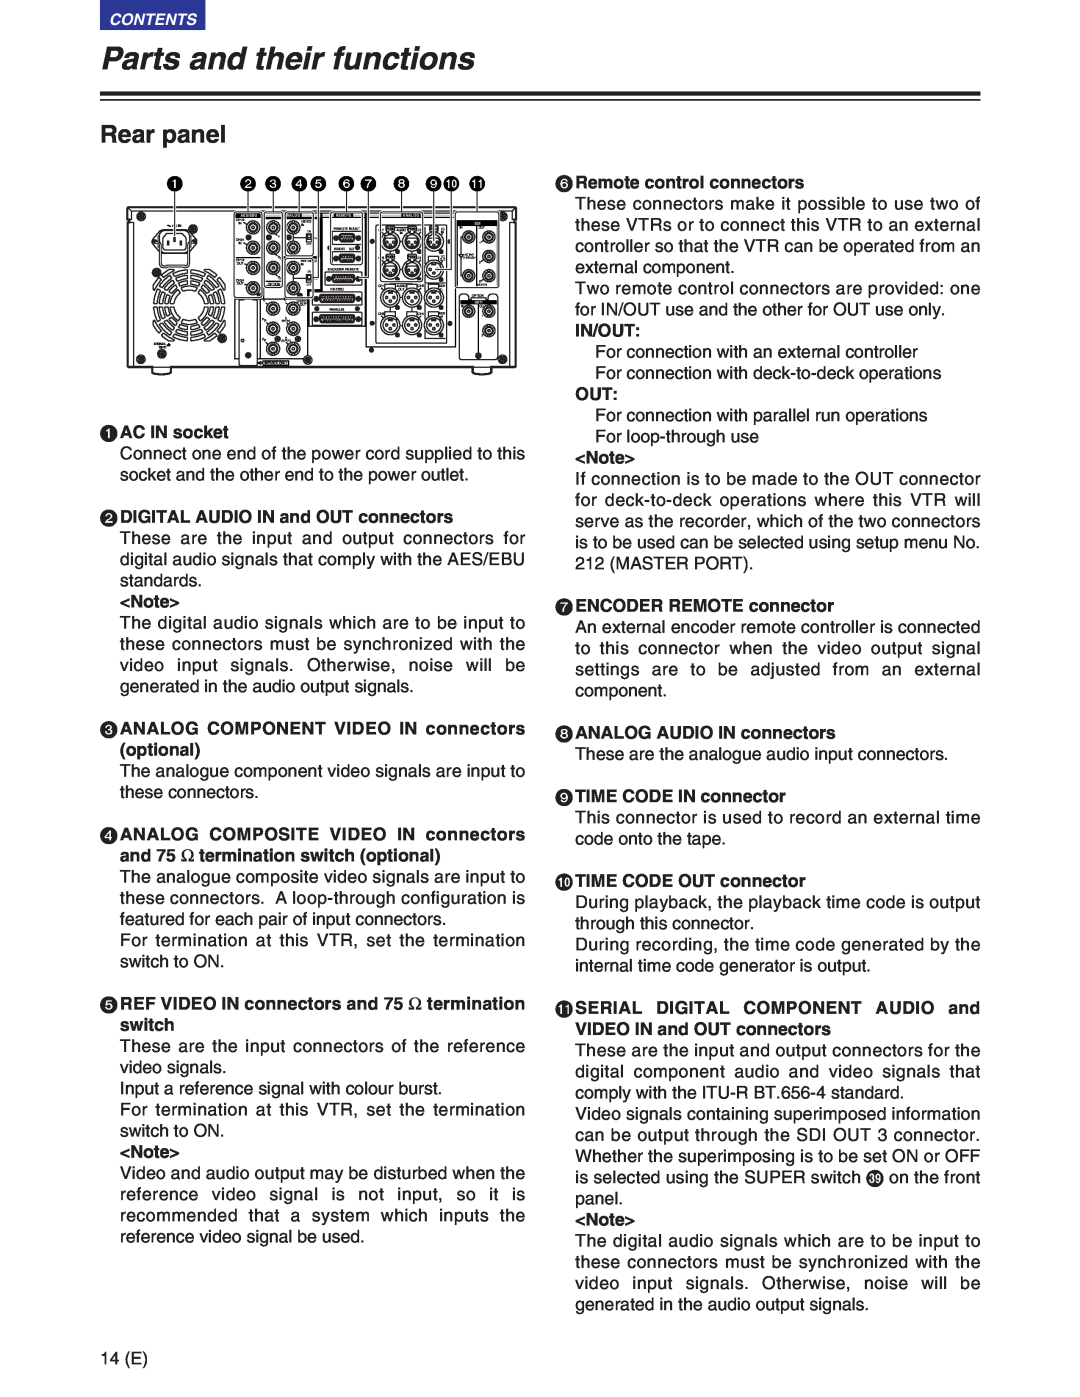 Panasonic AJ-SD930BE, AJ-SD955BE manual Rear panel, Parts and their functions 